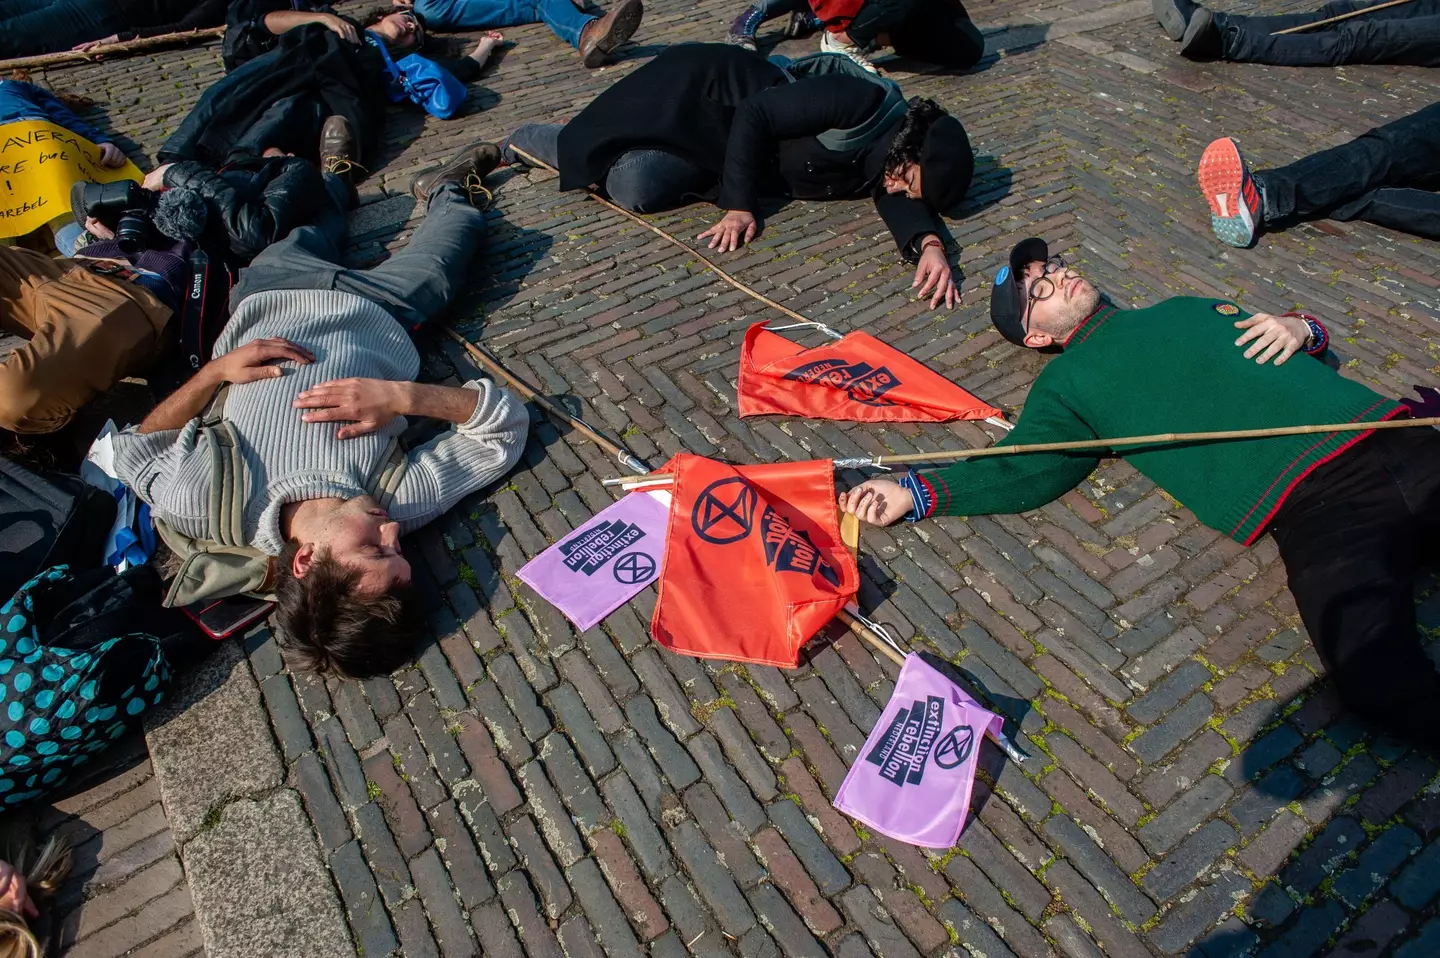 Movement's like Extinction Rebellion are attempting to halt the march towards human extinction.